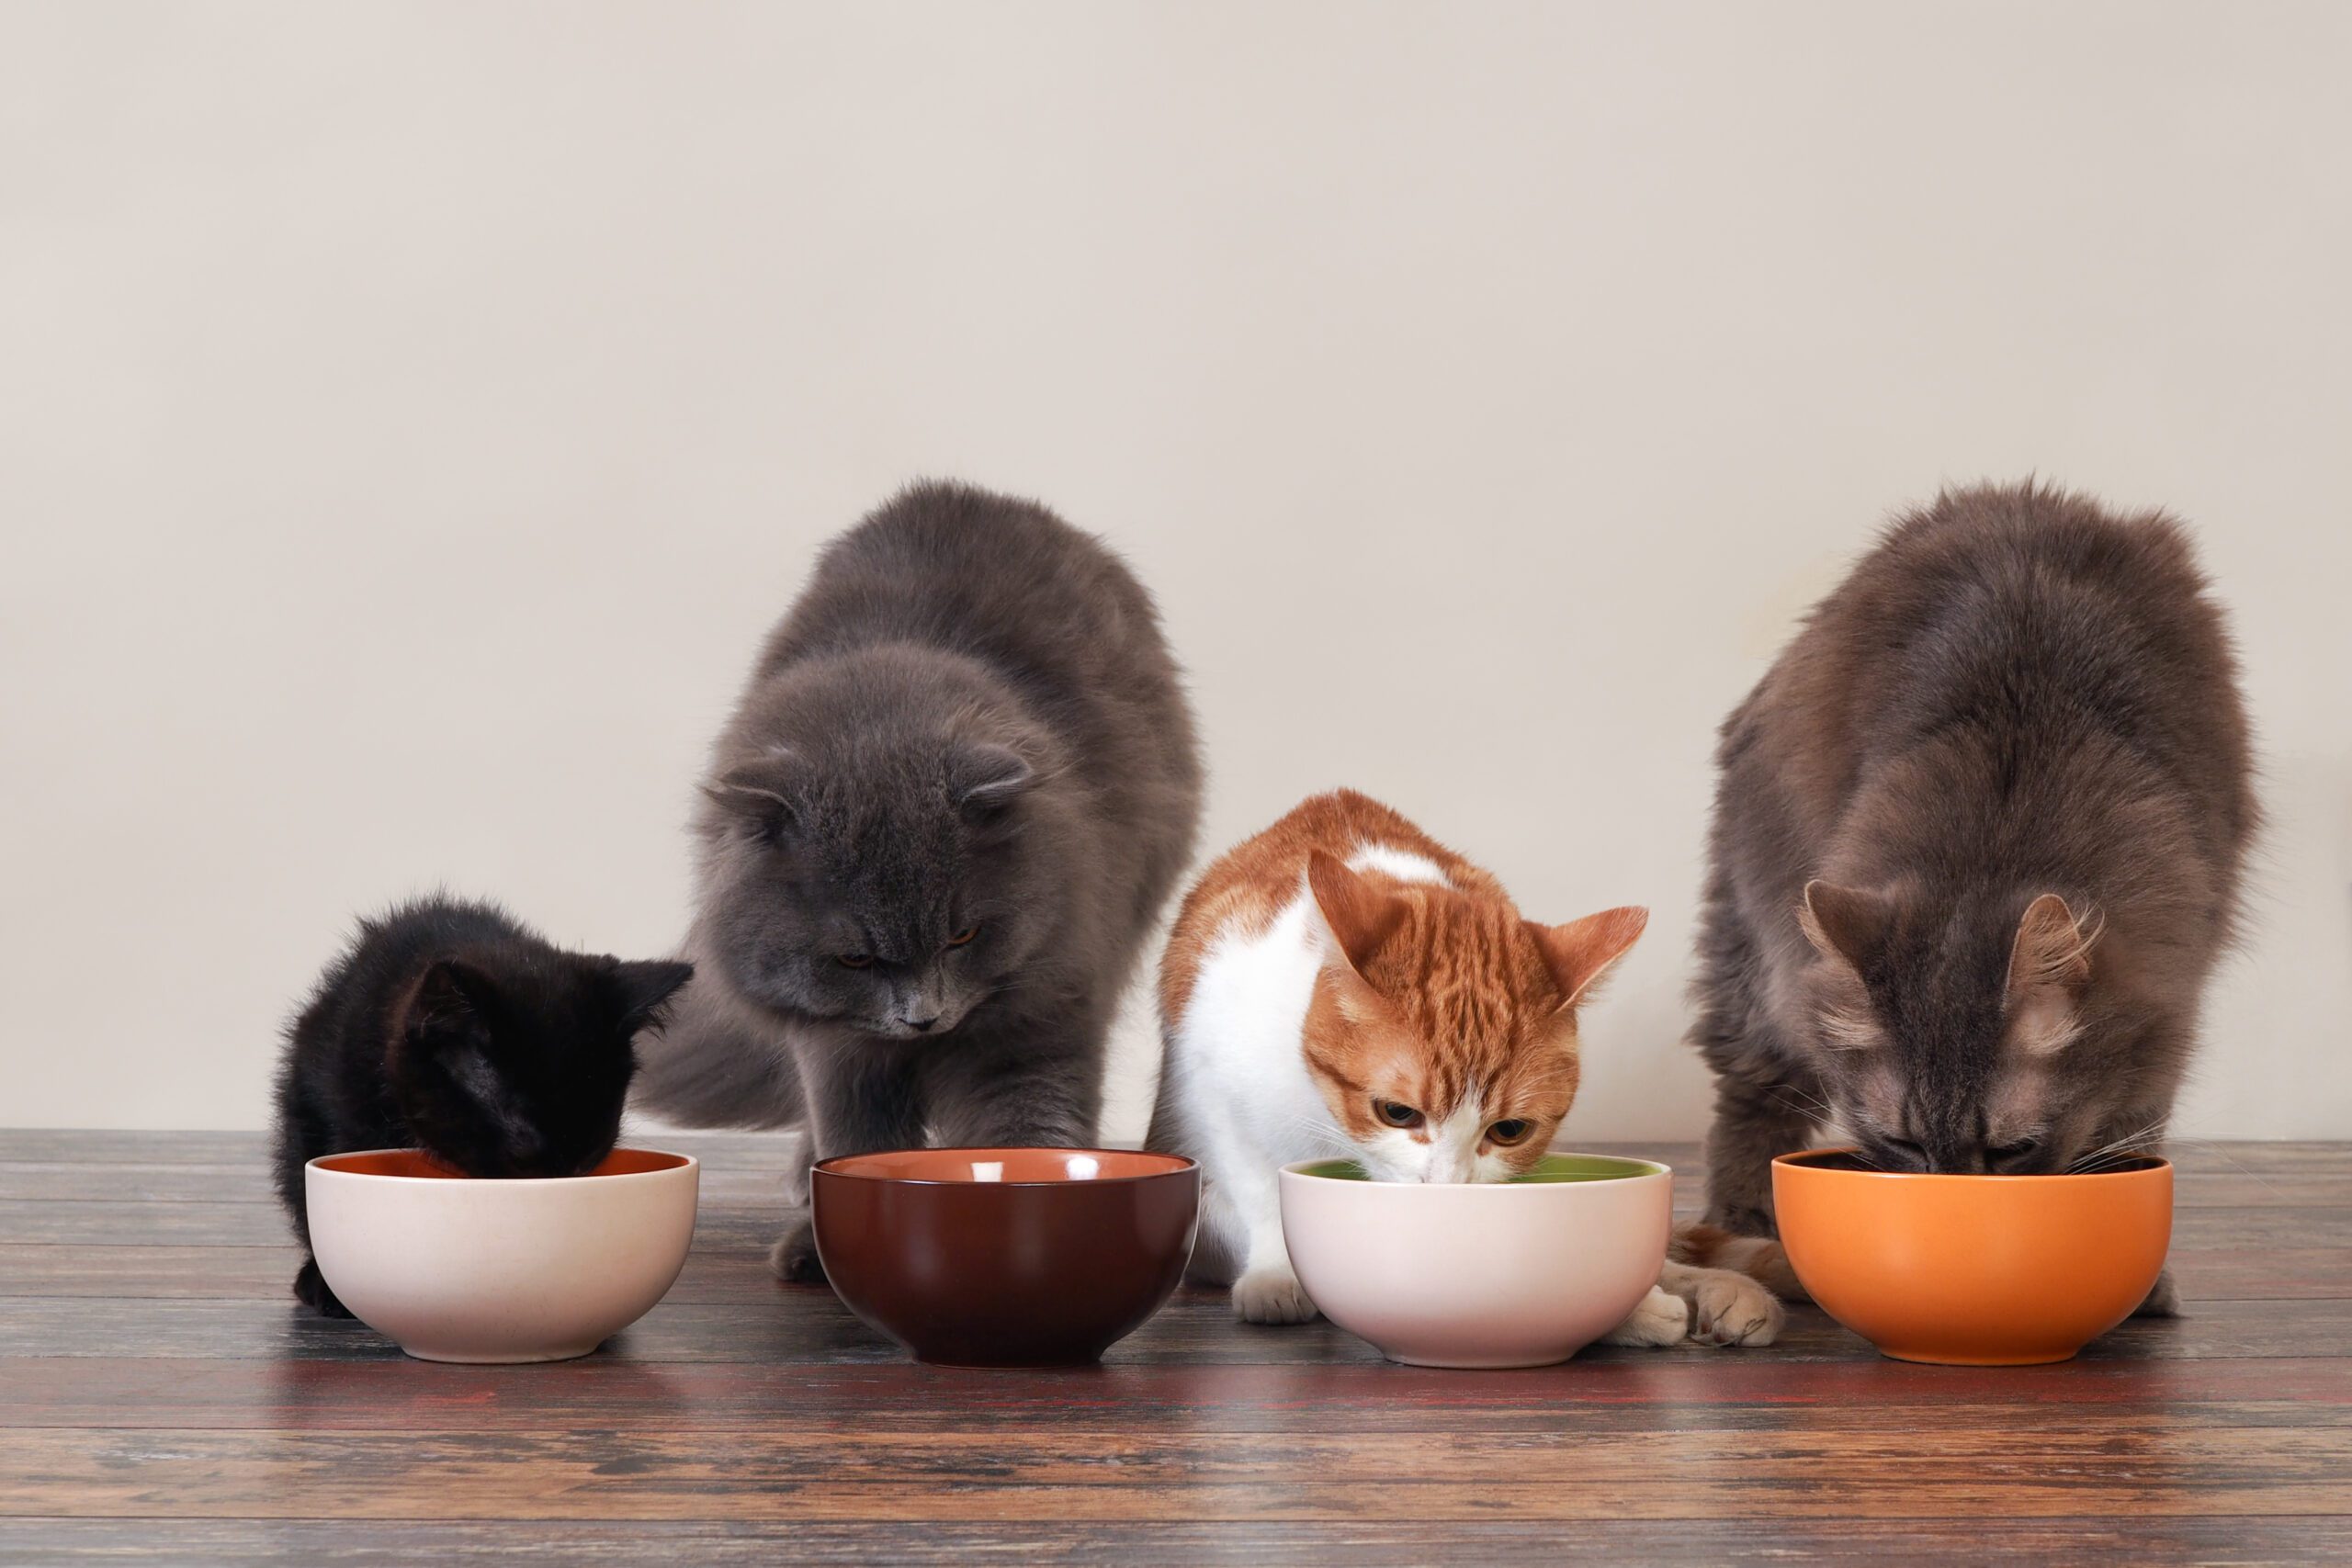 Cats eating their meals from various bowls on the ground